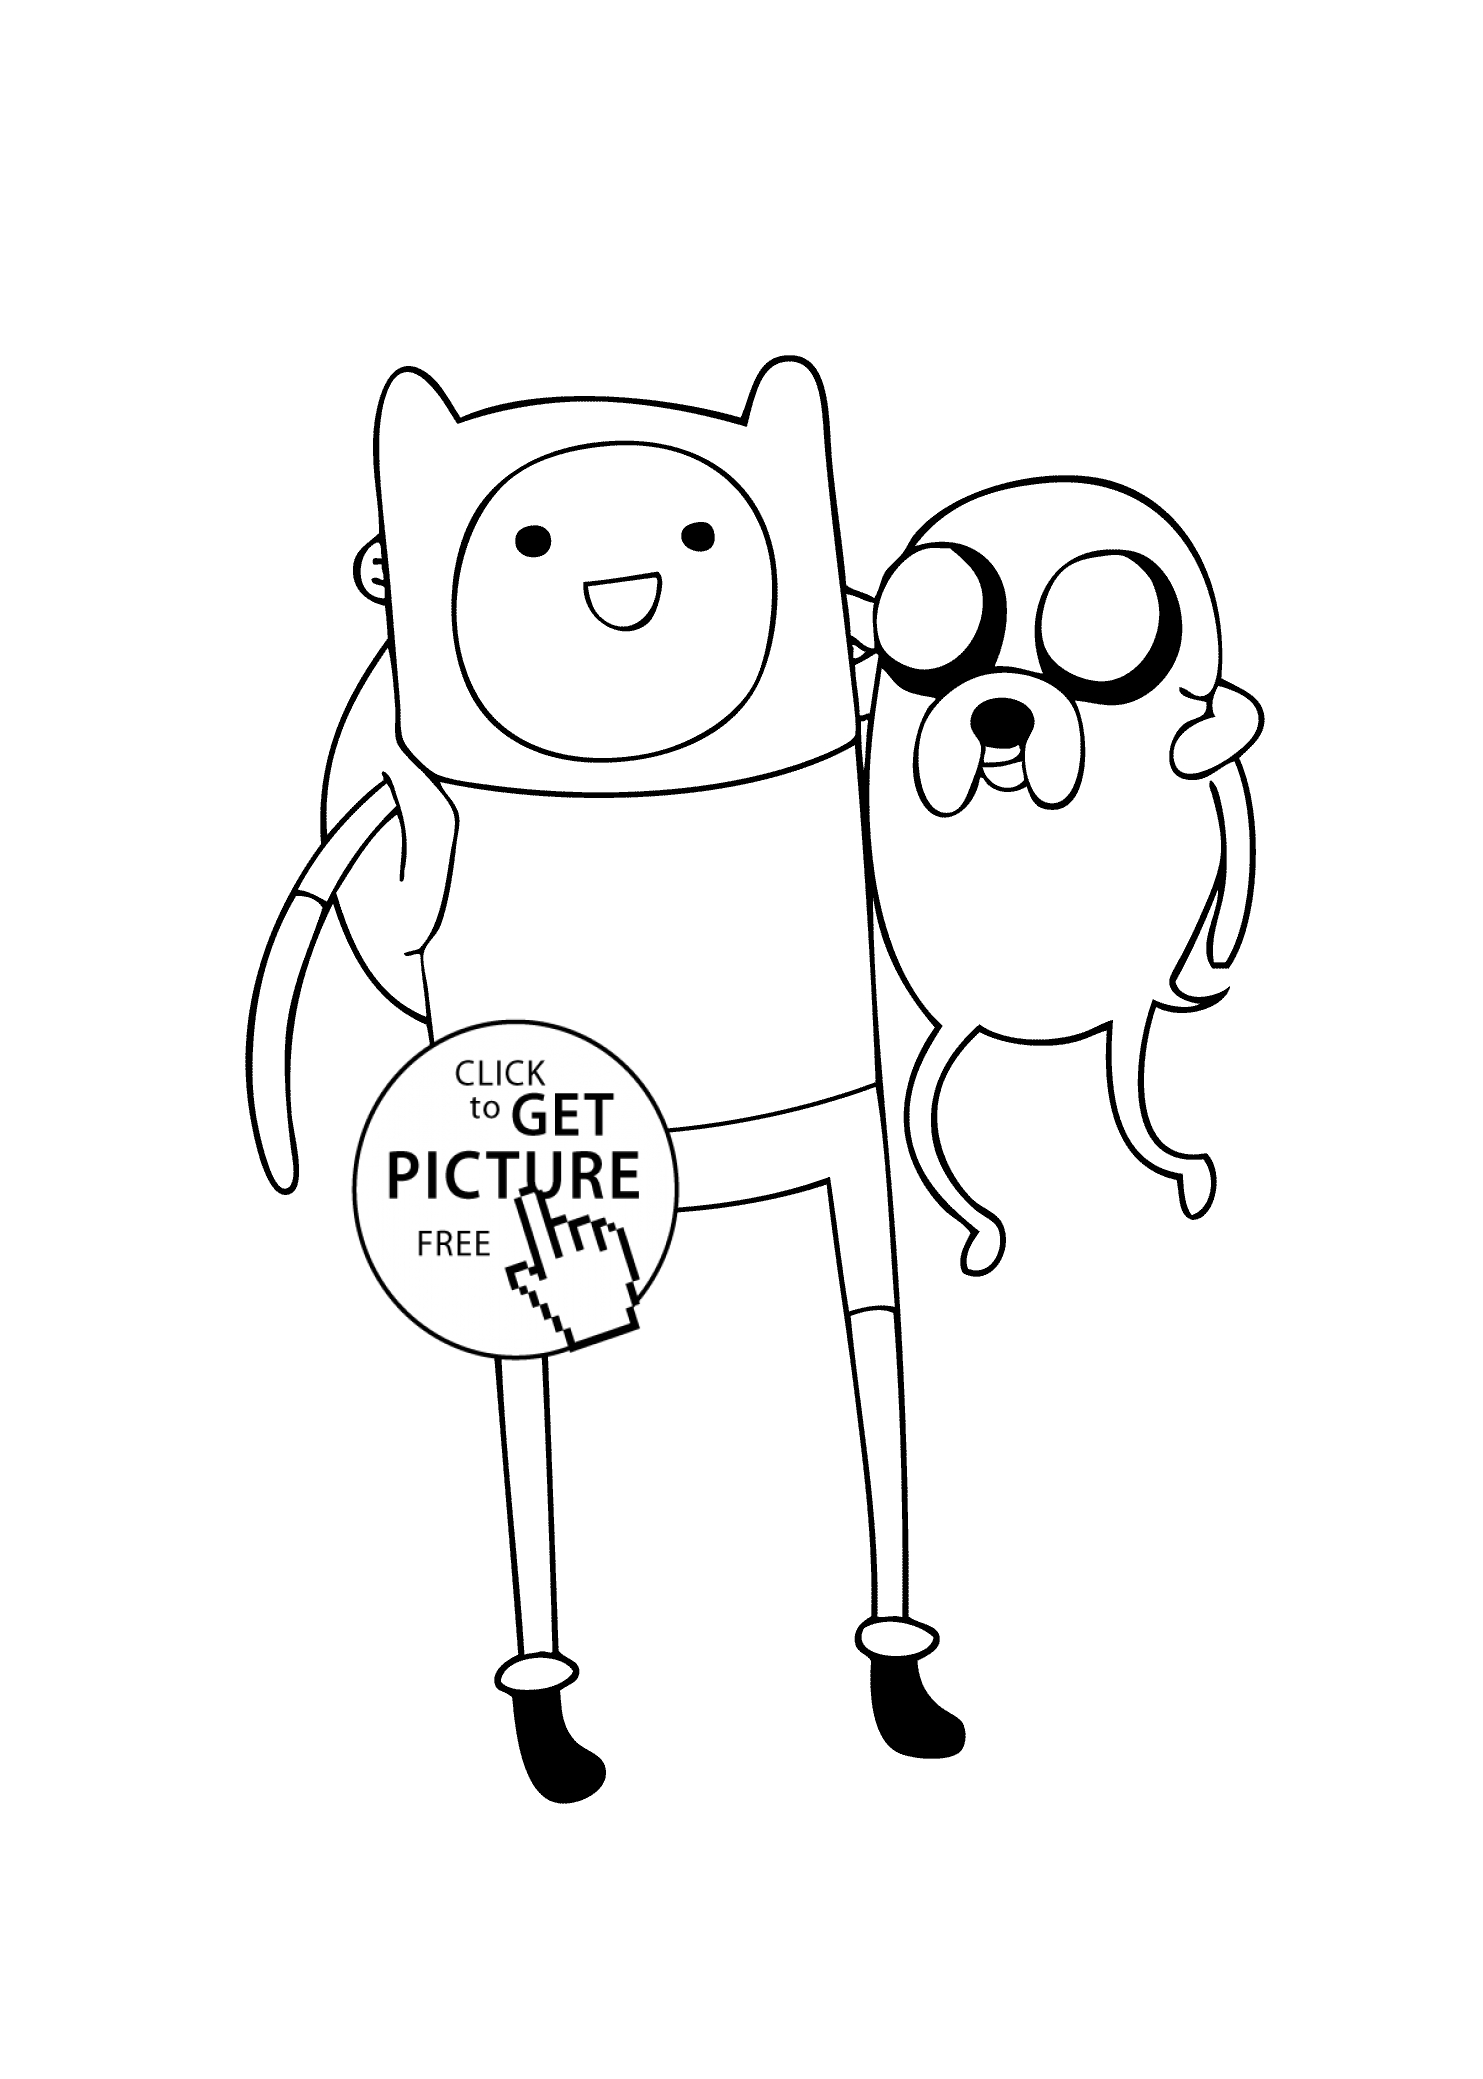 Printable Adventure Time Coloring Pages Finn And Jake Cartoons Coloring Pages For Kids Printable Free